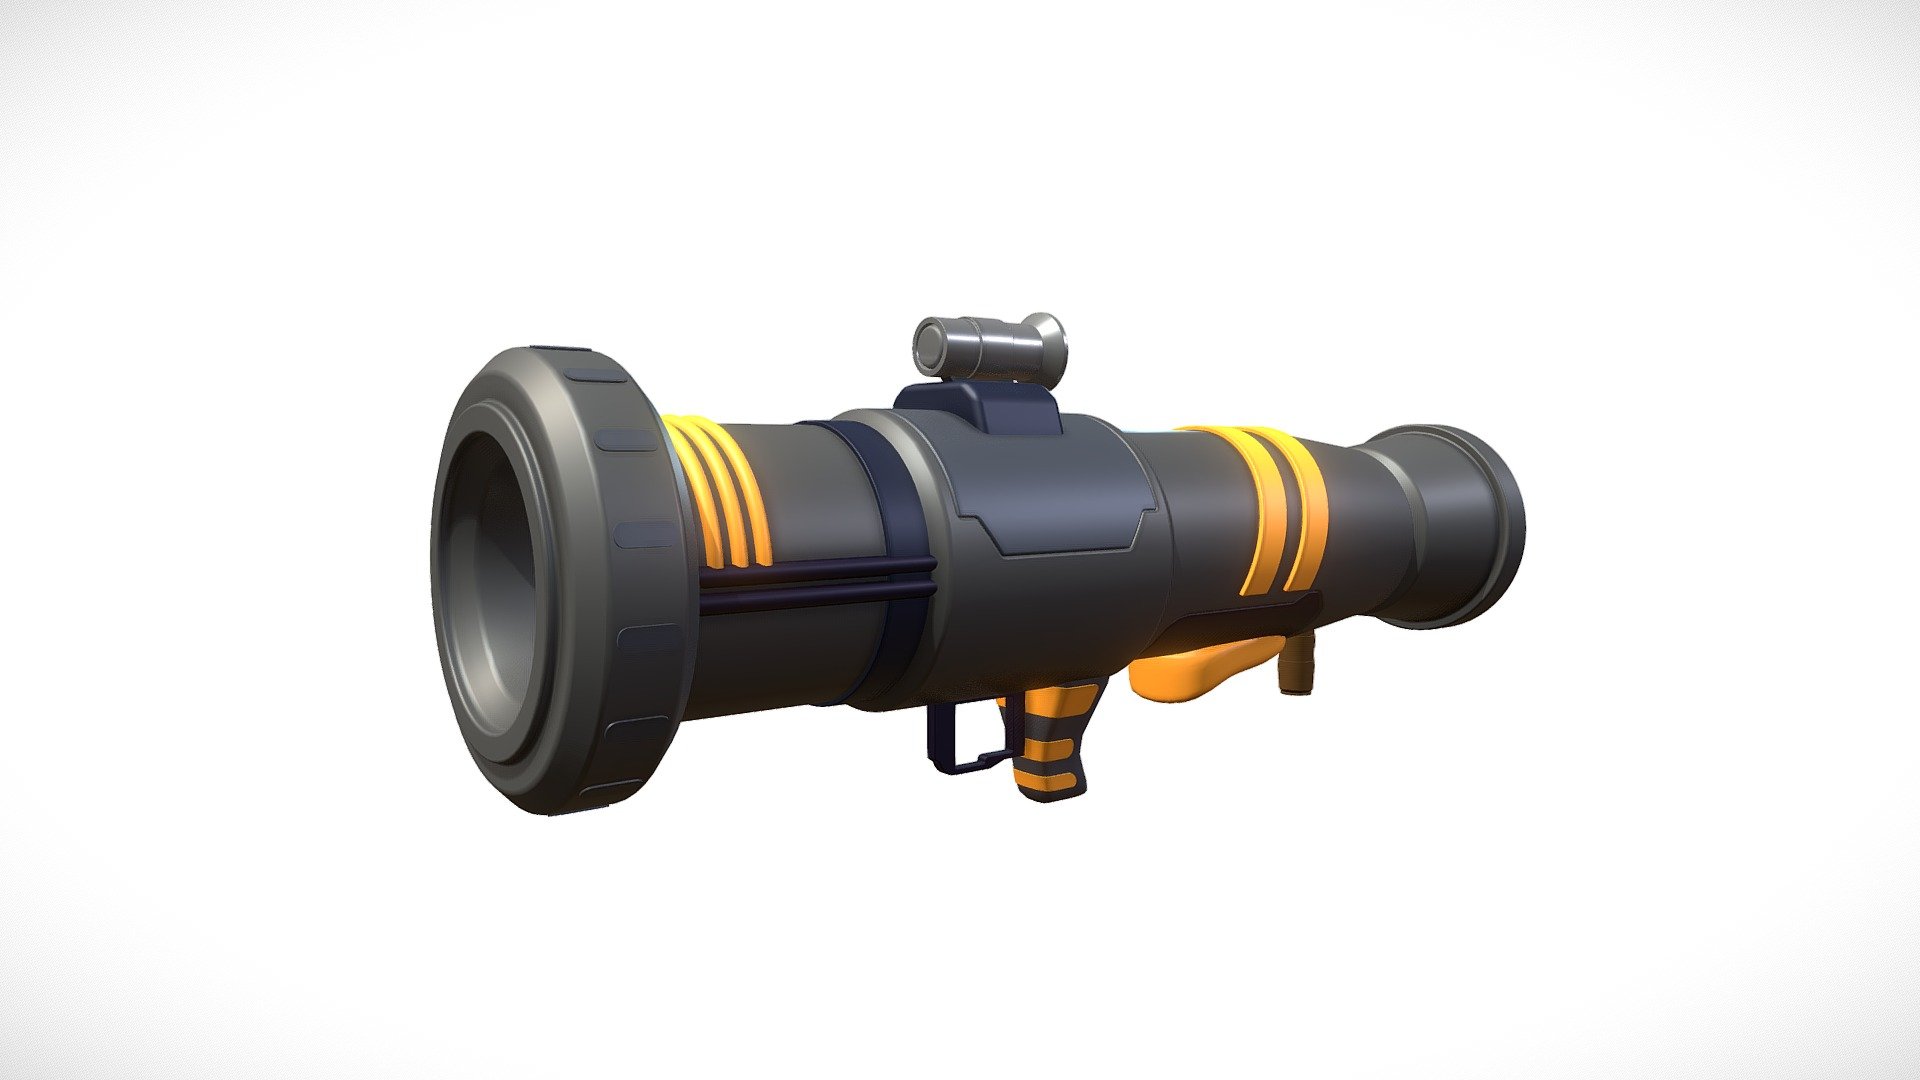 3D model of cartoon bazooka.

+22,500 faces.

Made with Blender 3d model